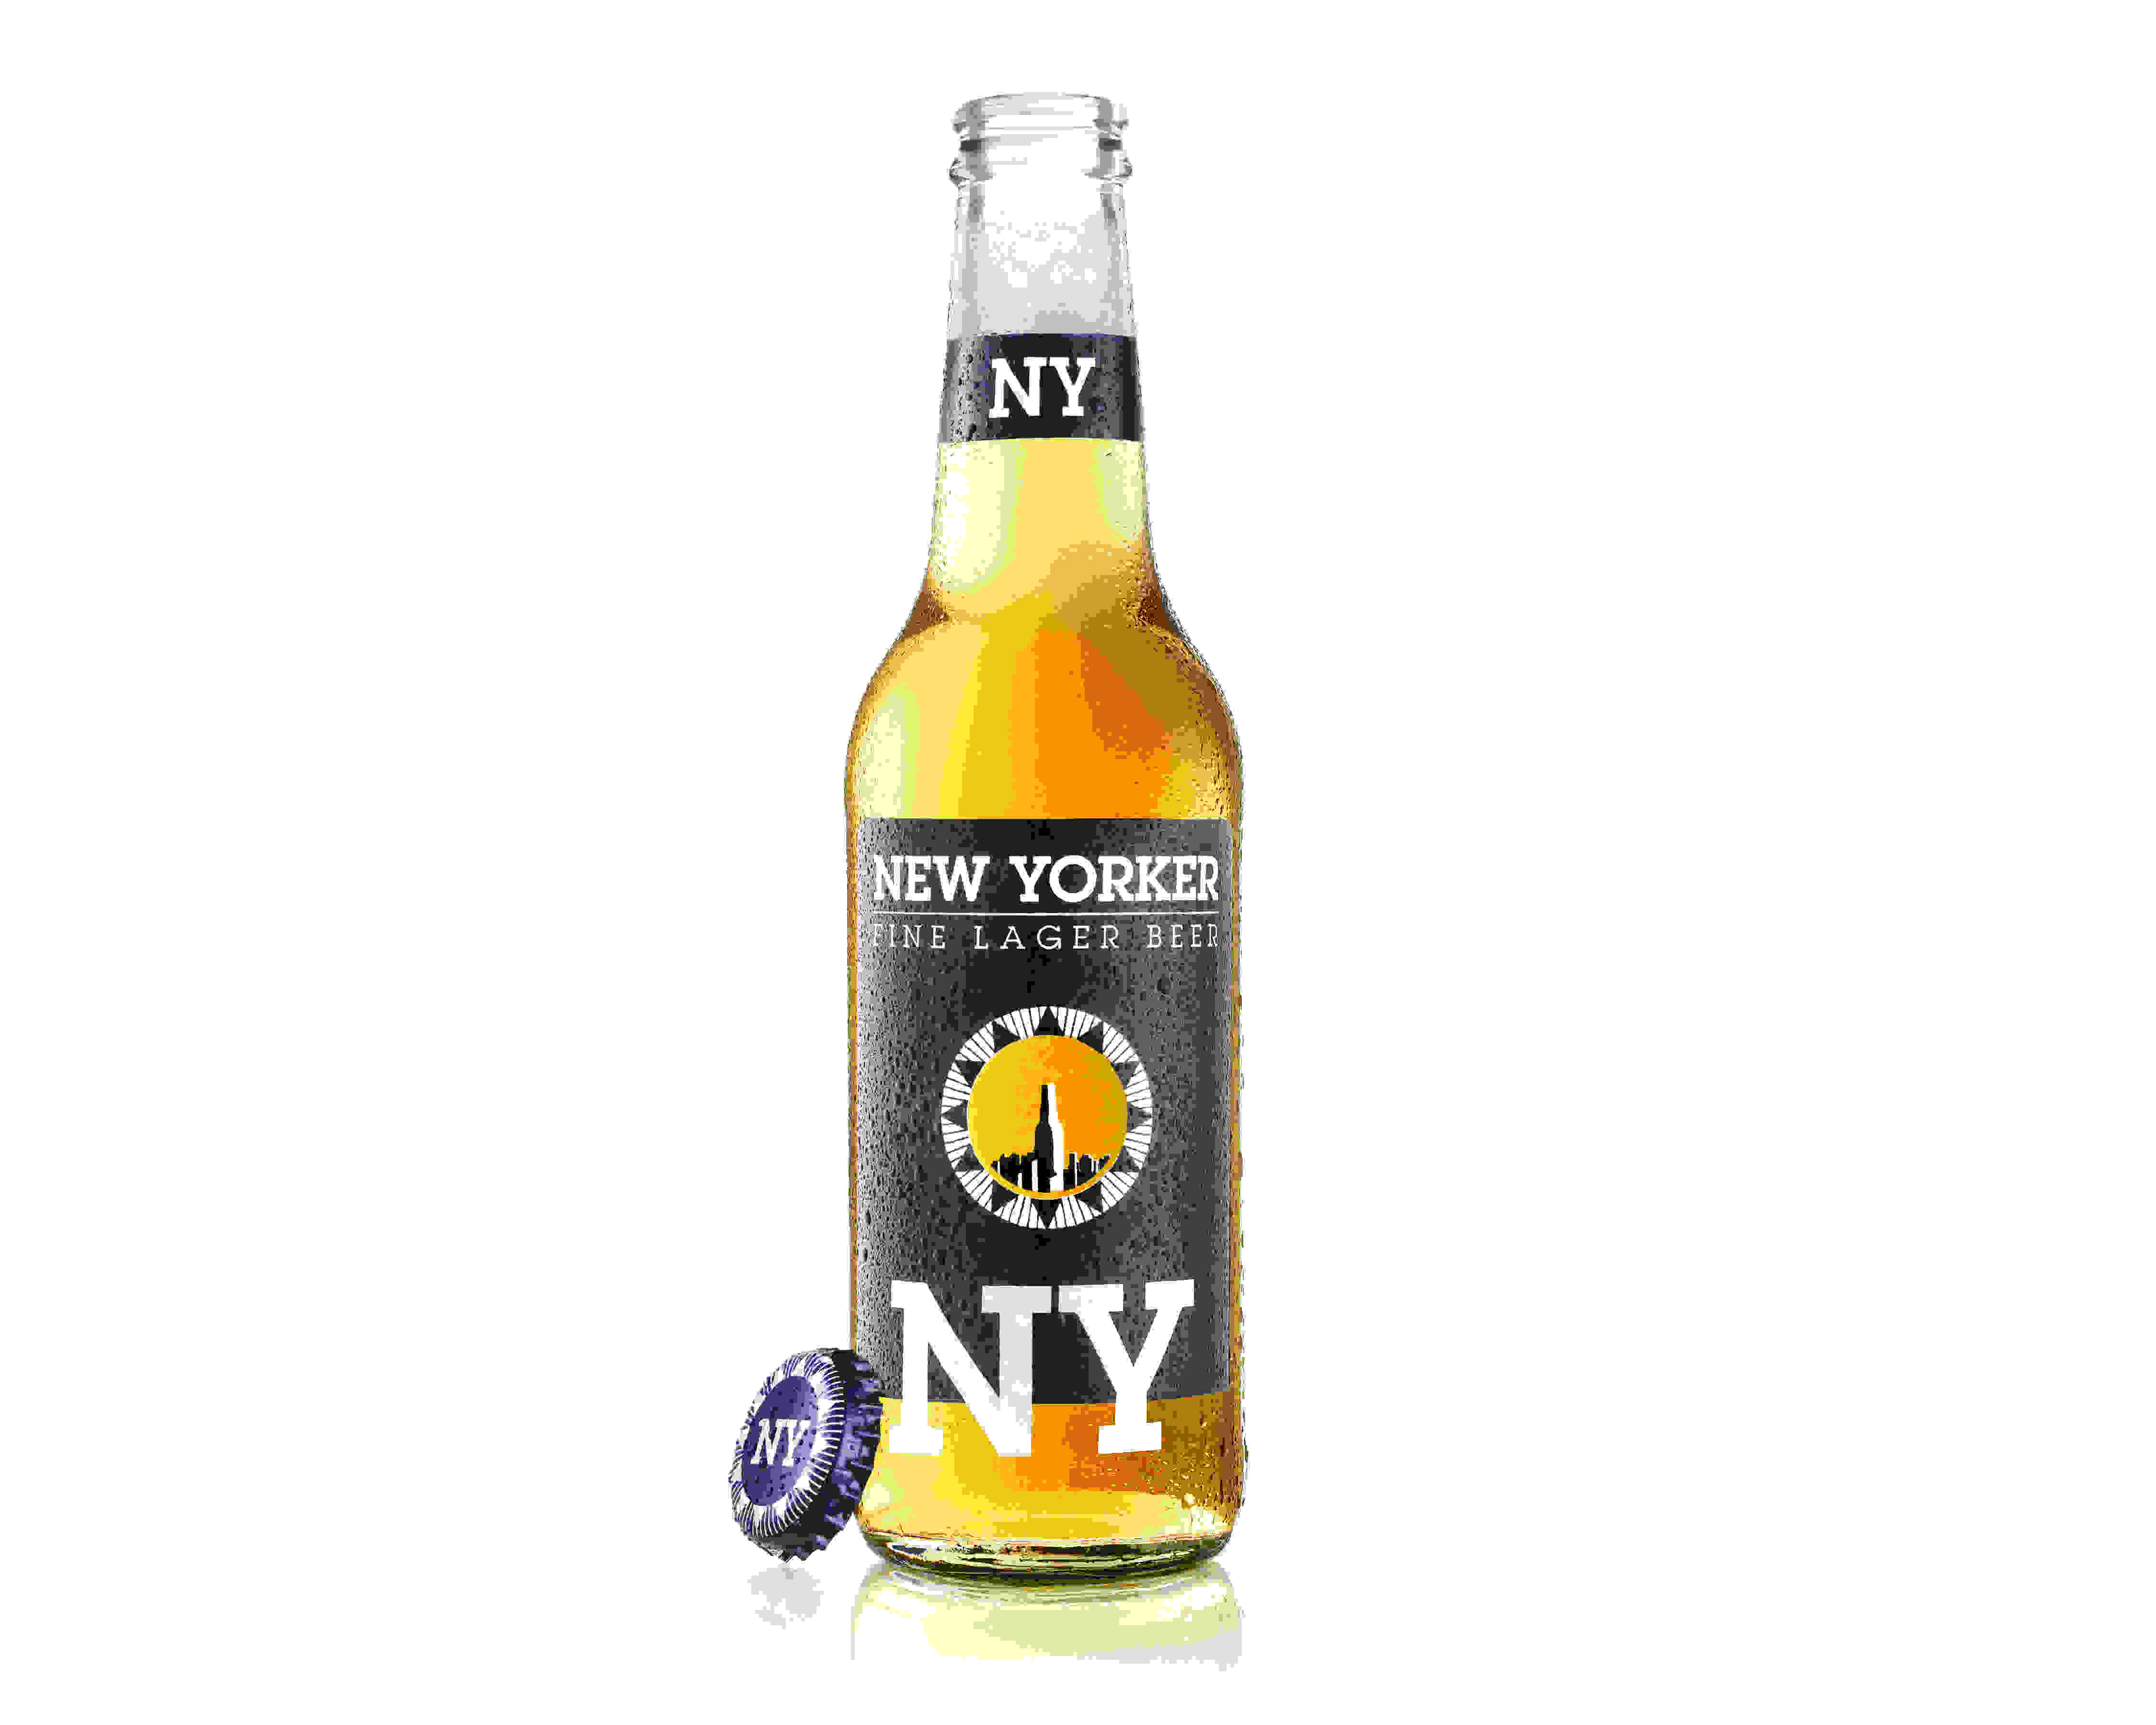 4.2% ABV New Yorker Fine Lager Beer is light though full of flavour and has a pale, golden colour.